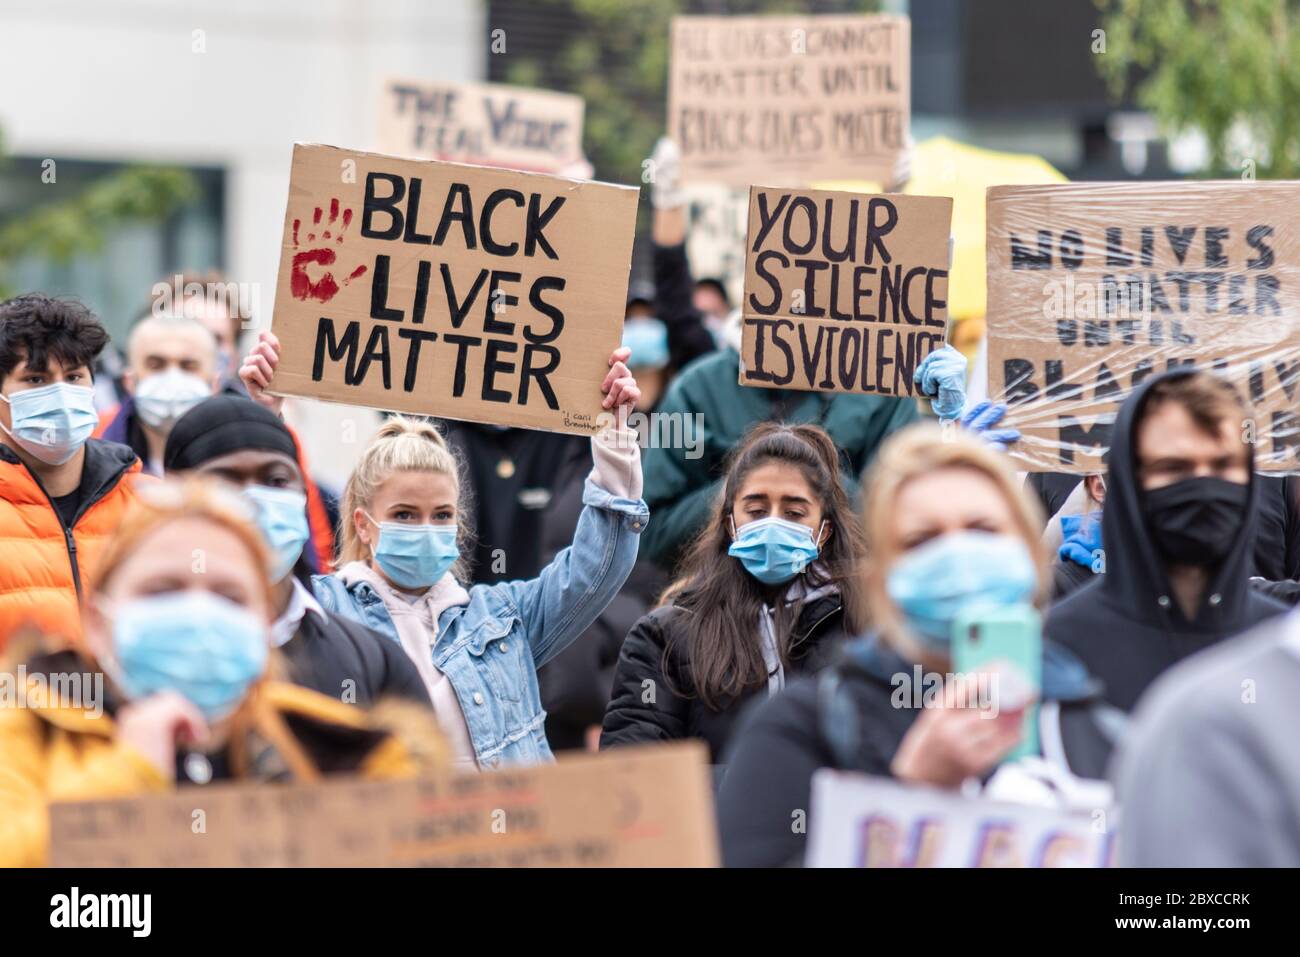 Black Lives Matter anti racism protest demonstration in Southend on Sea, Essex, UK. Crowd with placards. Your silence is violence. White, Caucasian Stock Photo